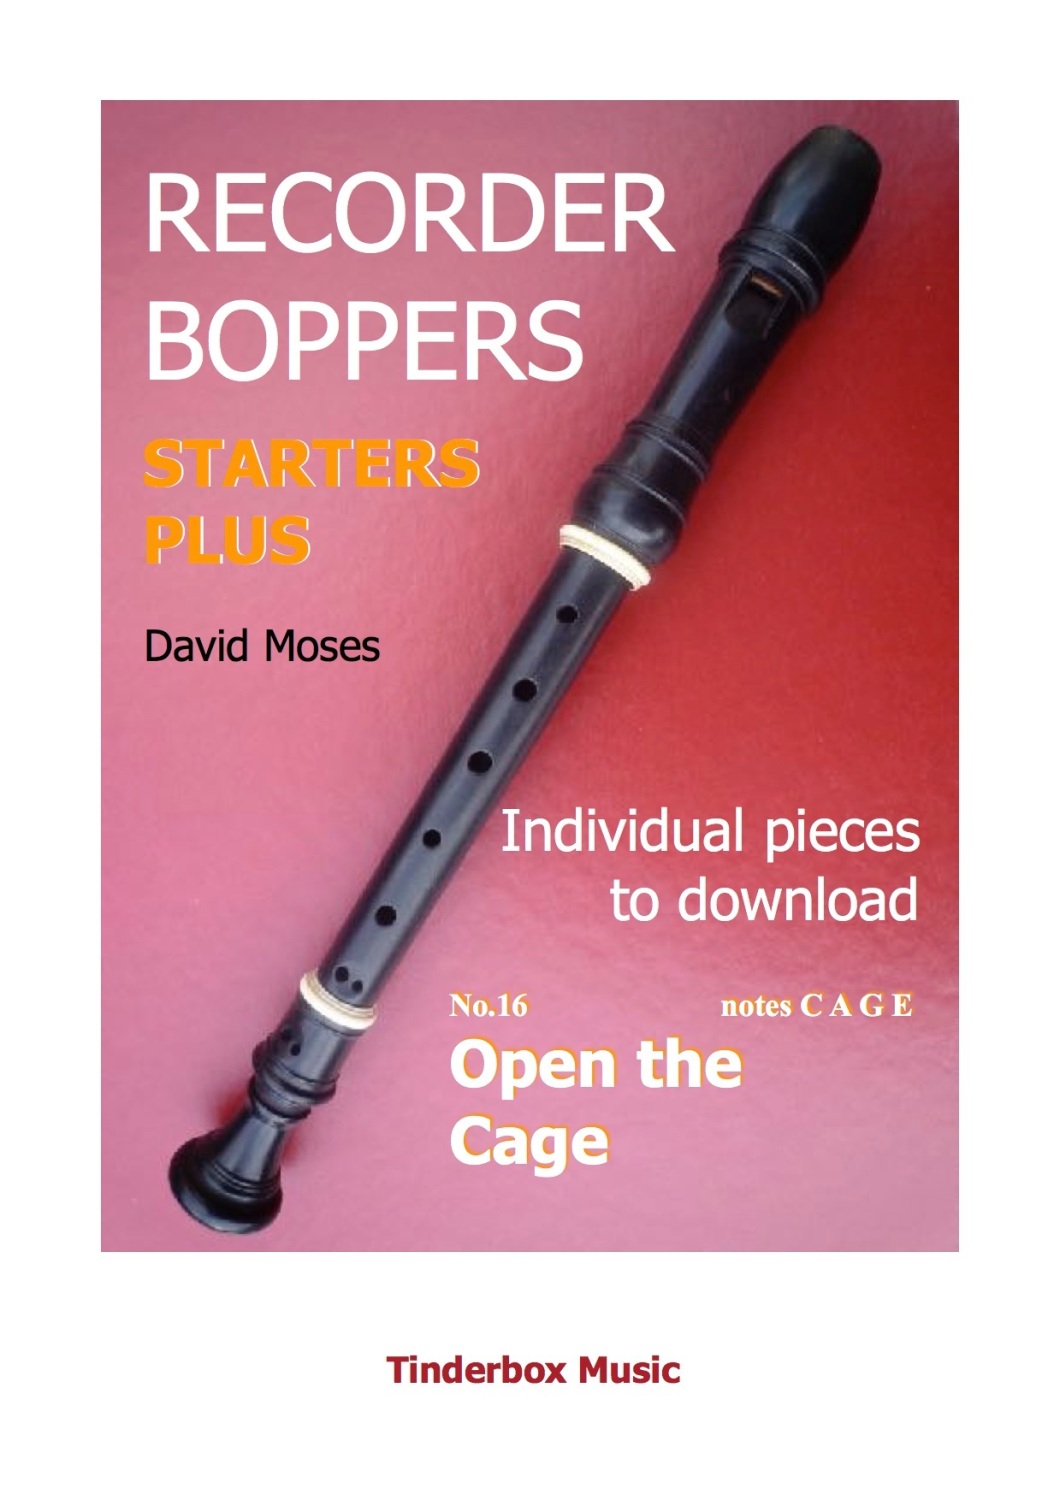 STARTERS PLUS individual pieces no.16 OPEN THE CAGE  download